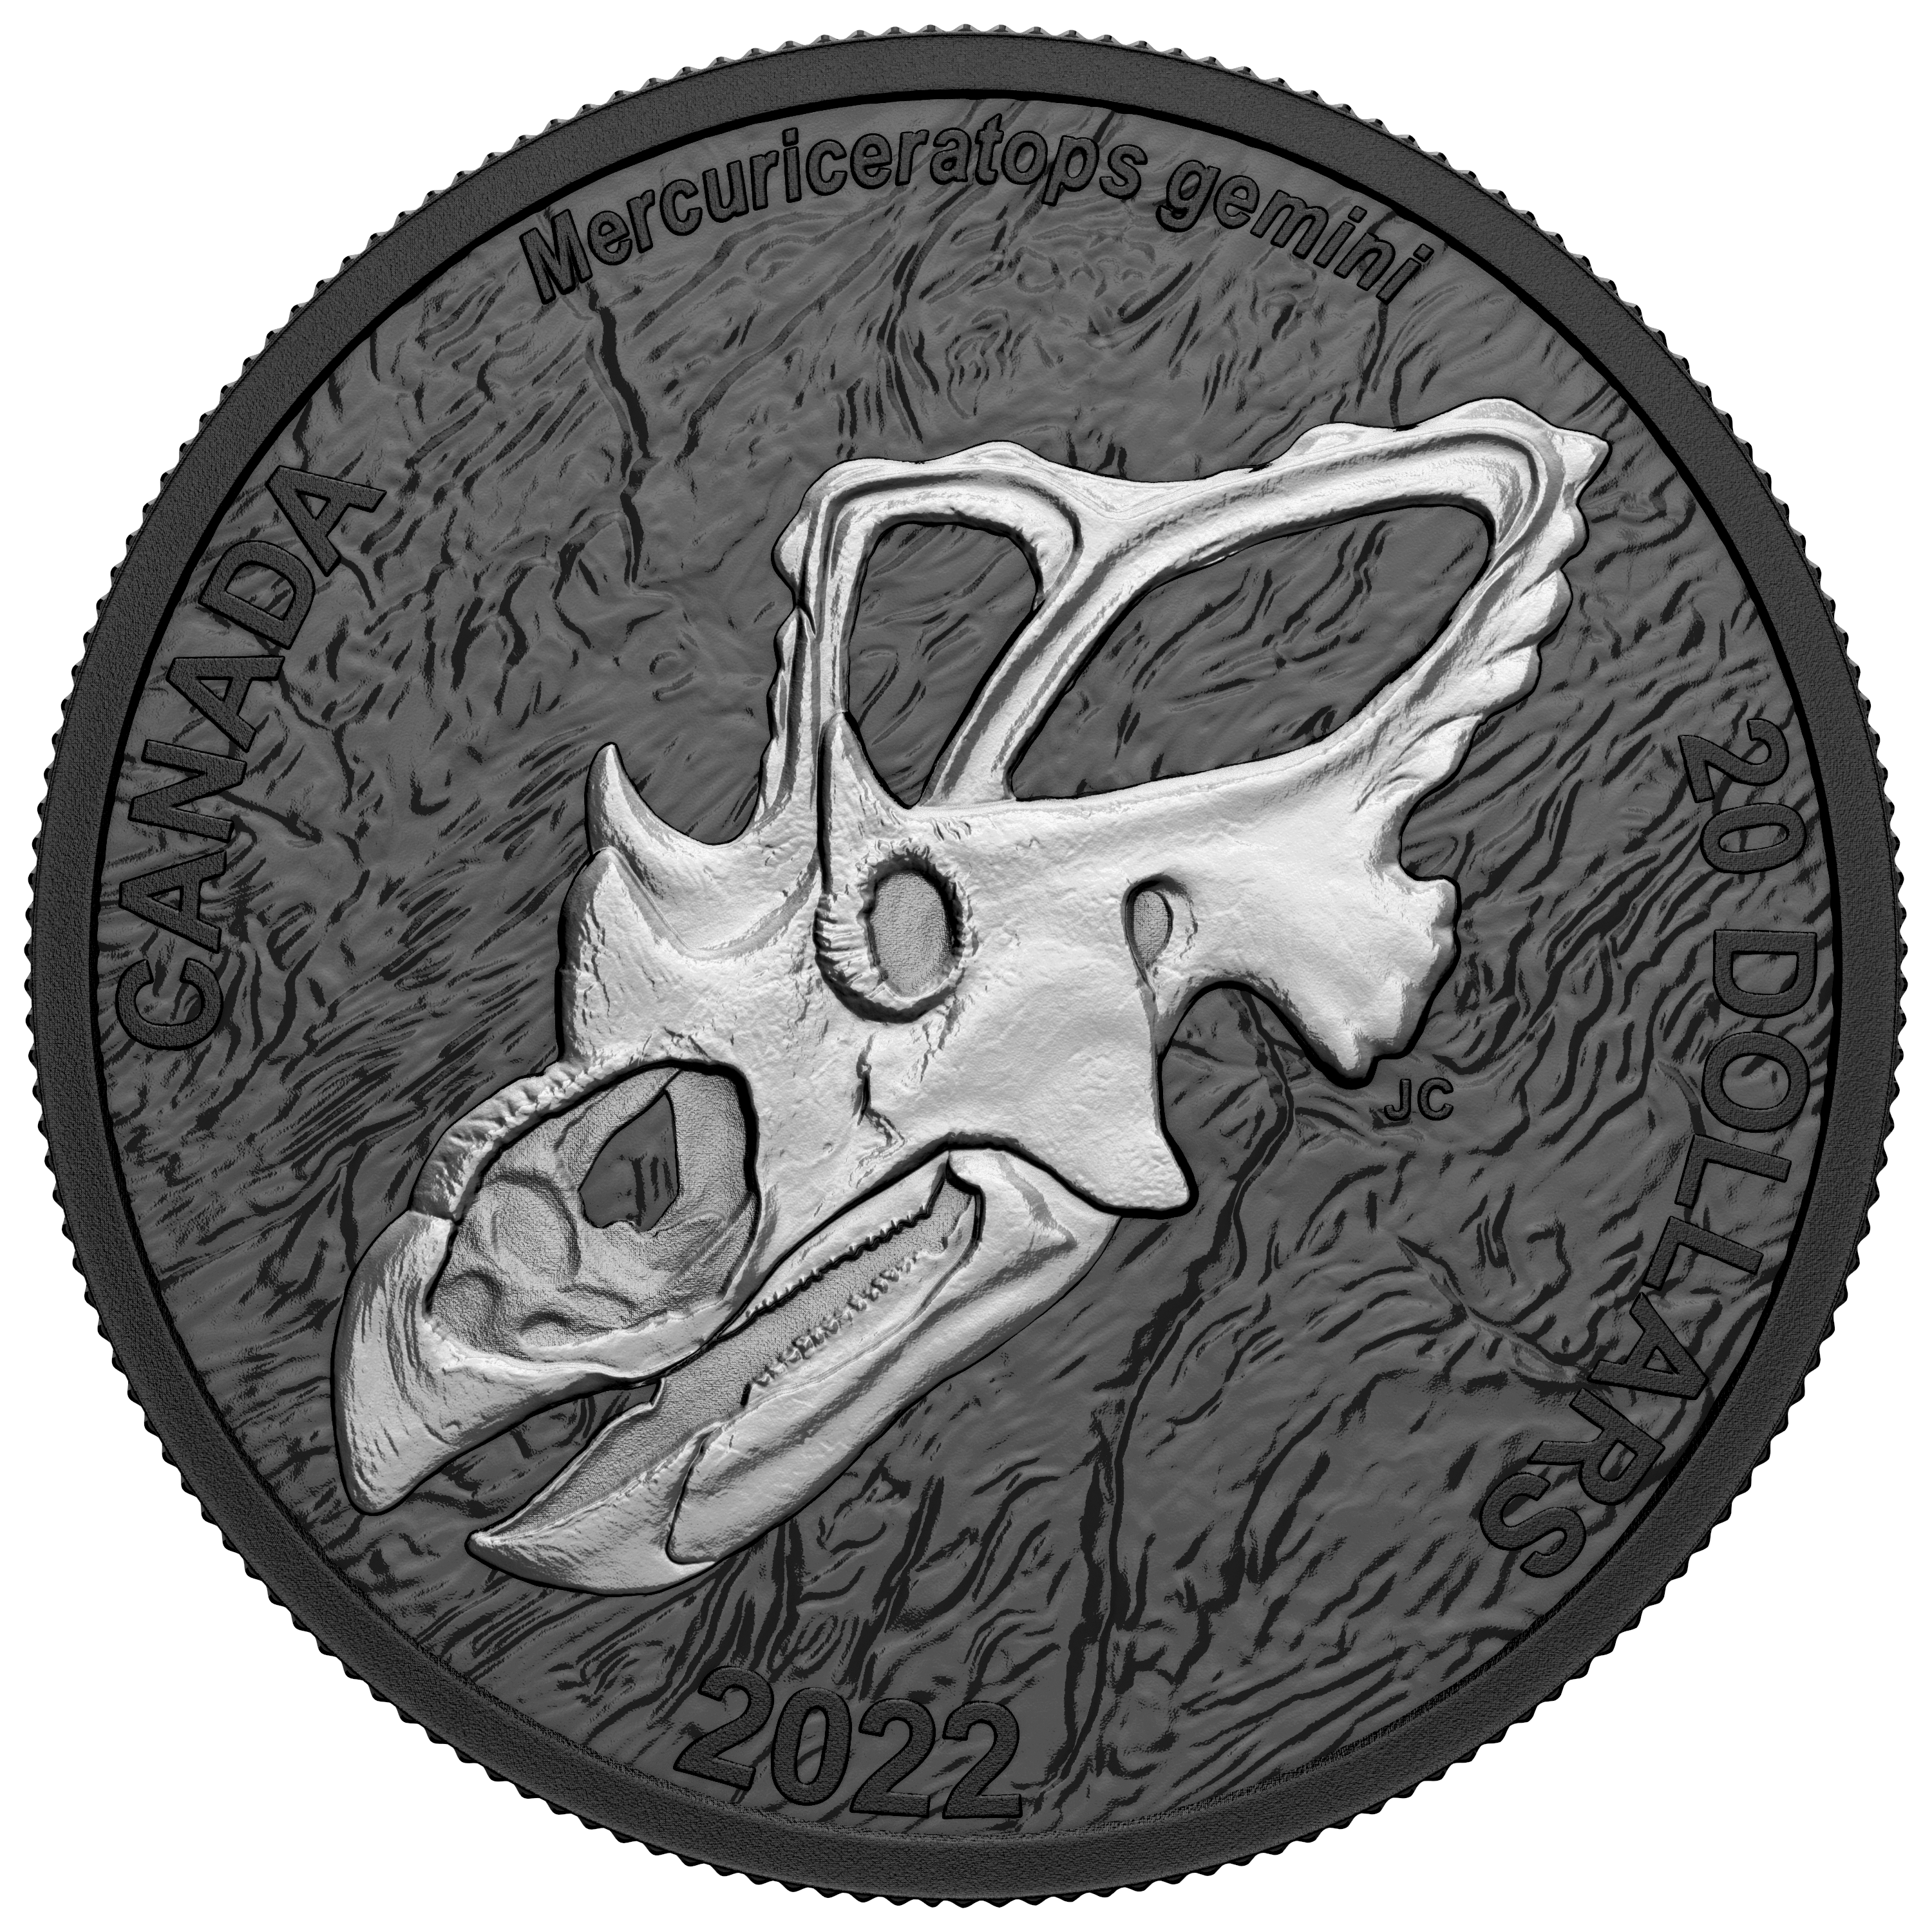 MERCURY'S HORNED FACE Discovering Dinosaurs 1 Oz Silver Coin $20 Canada 2022